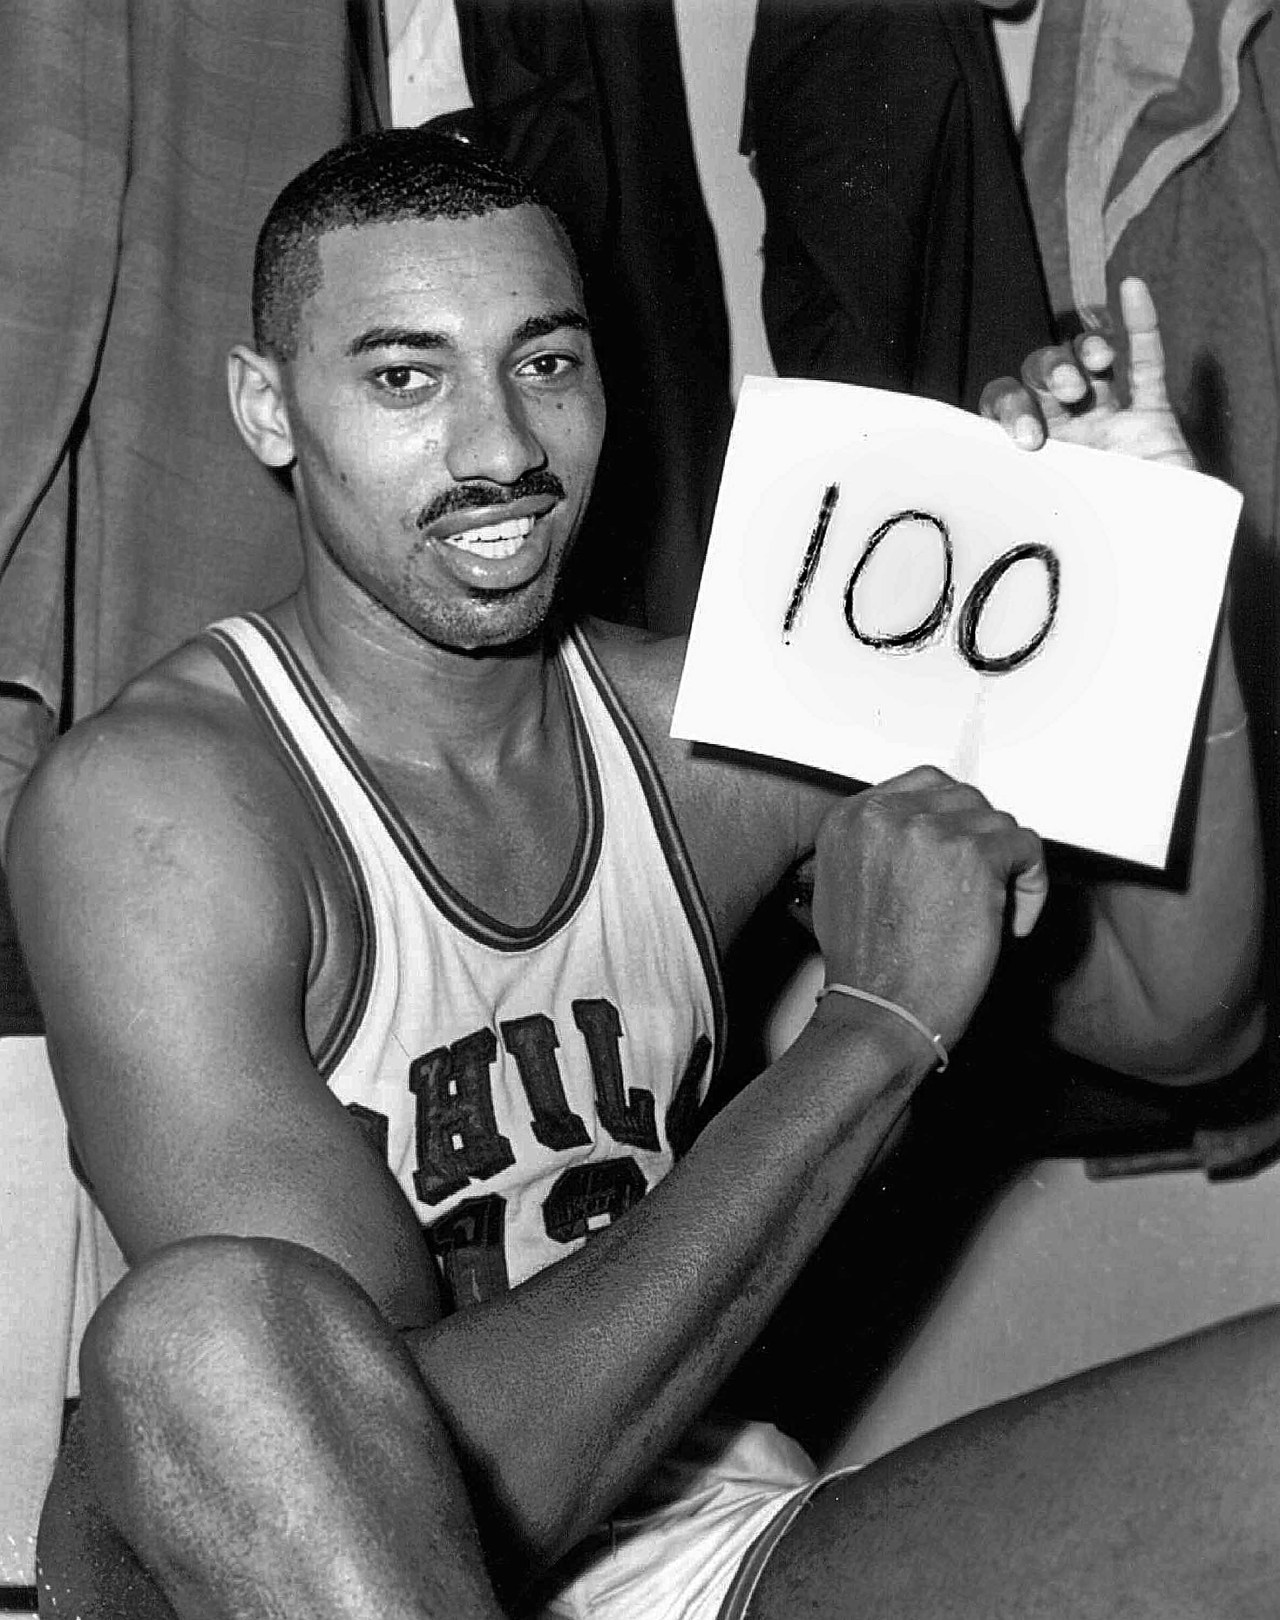 BACK IN THE DAY |3/2/62| Wilt Chamberlain set the single-game scoring record in the